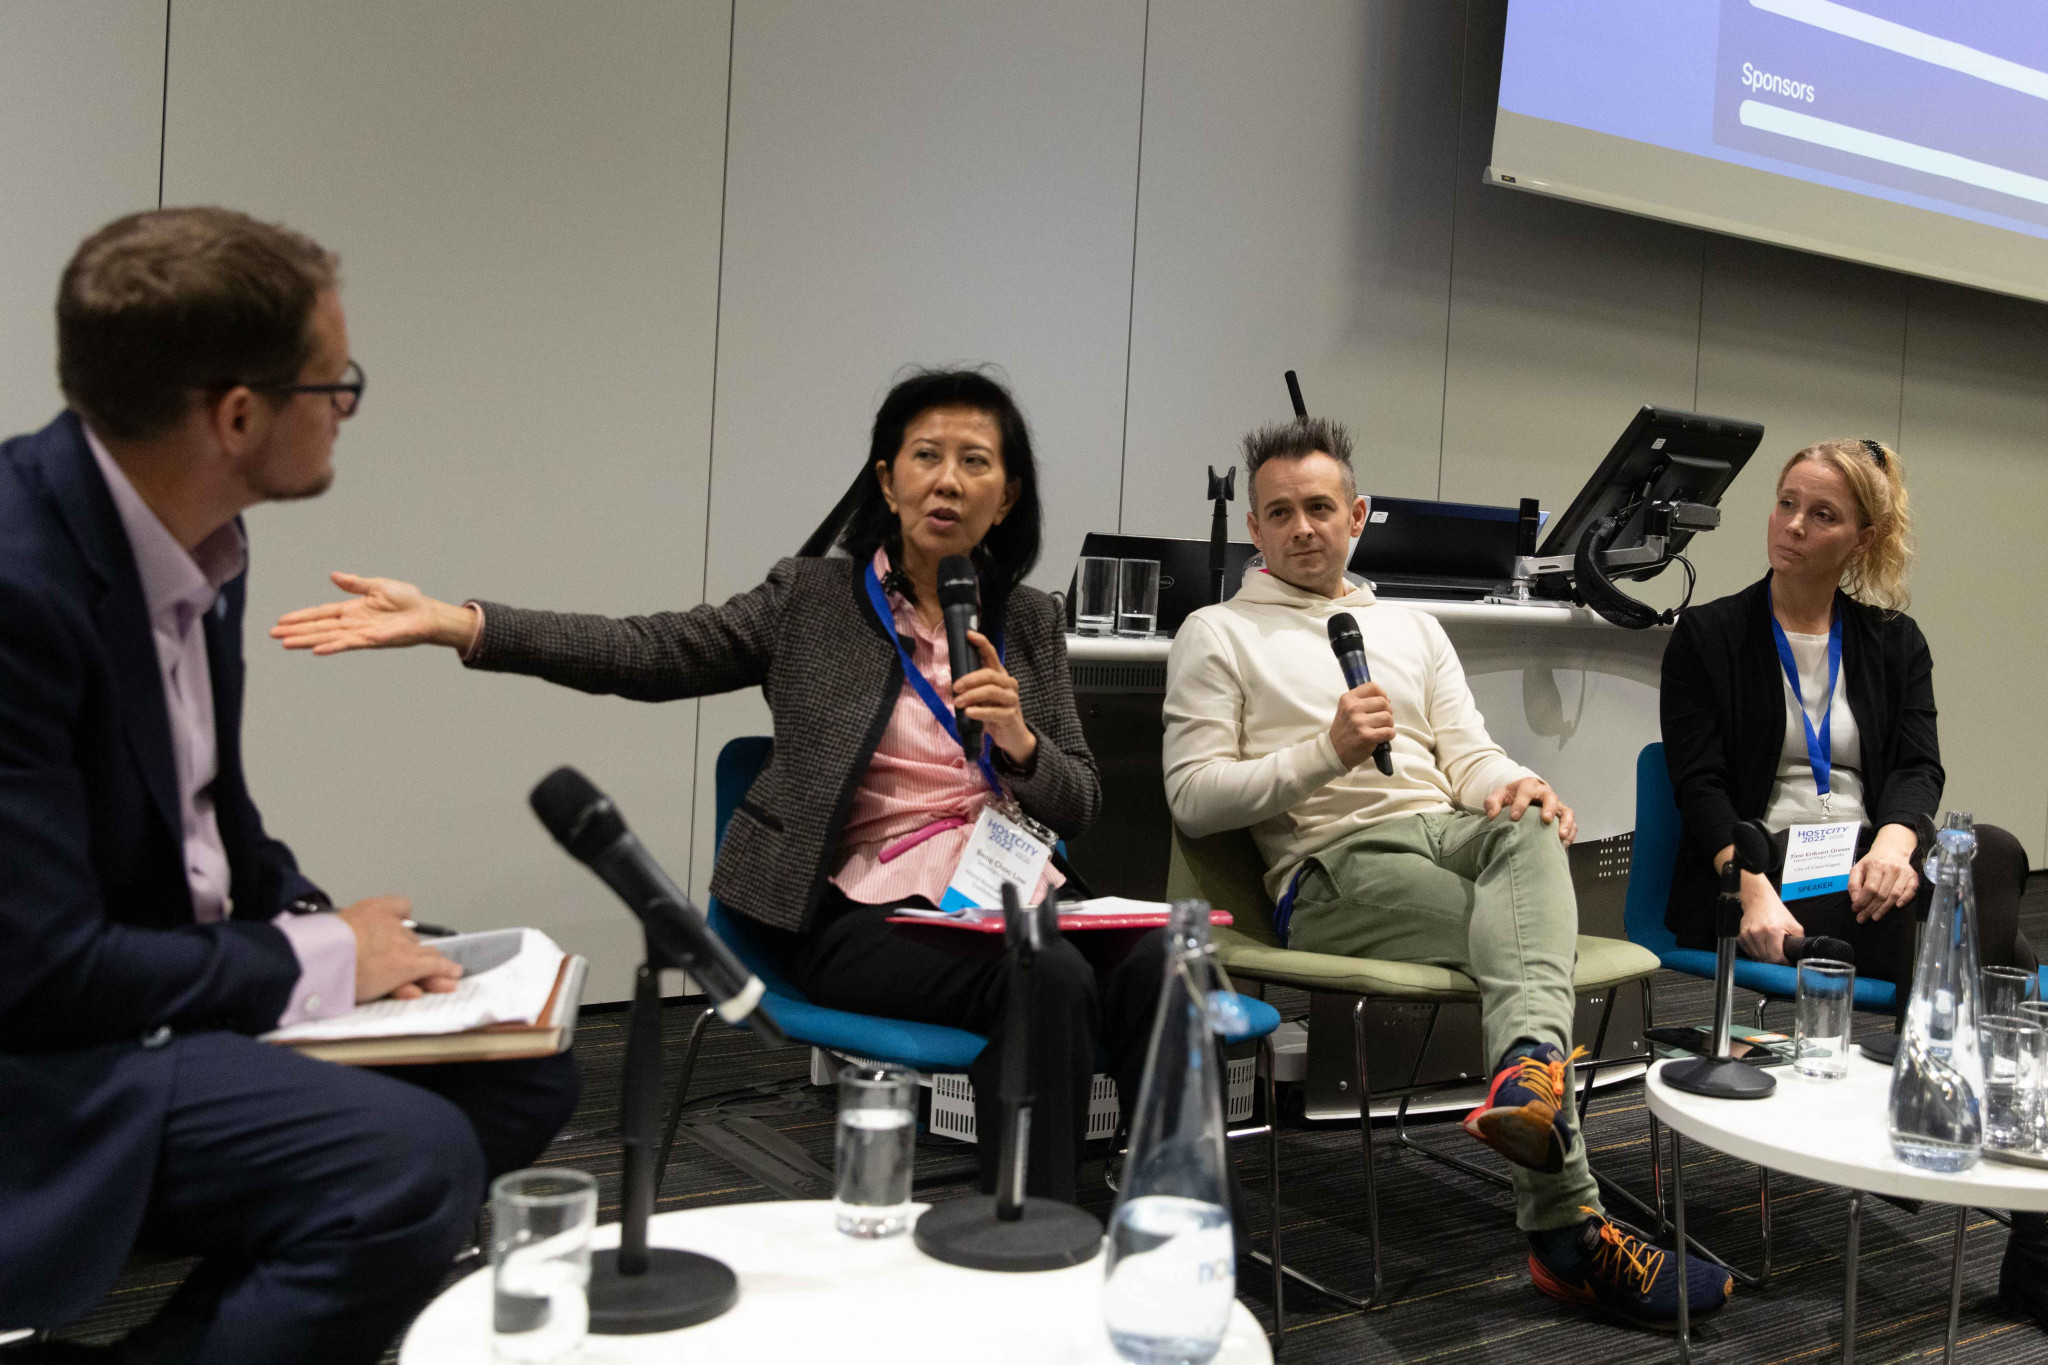 World Baseball Softball Confederation secretary general Beng Choo Low, second left, shared how the COVID-19 pandemic and natural disasters had prompted new event concepts including a virtual Baseball World Cup ©Rob Lindblade